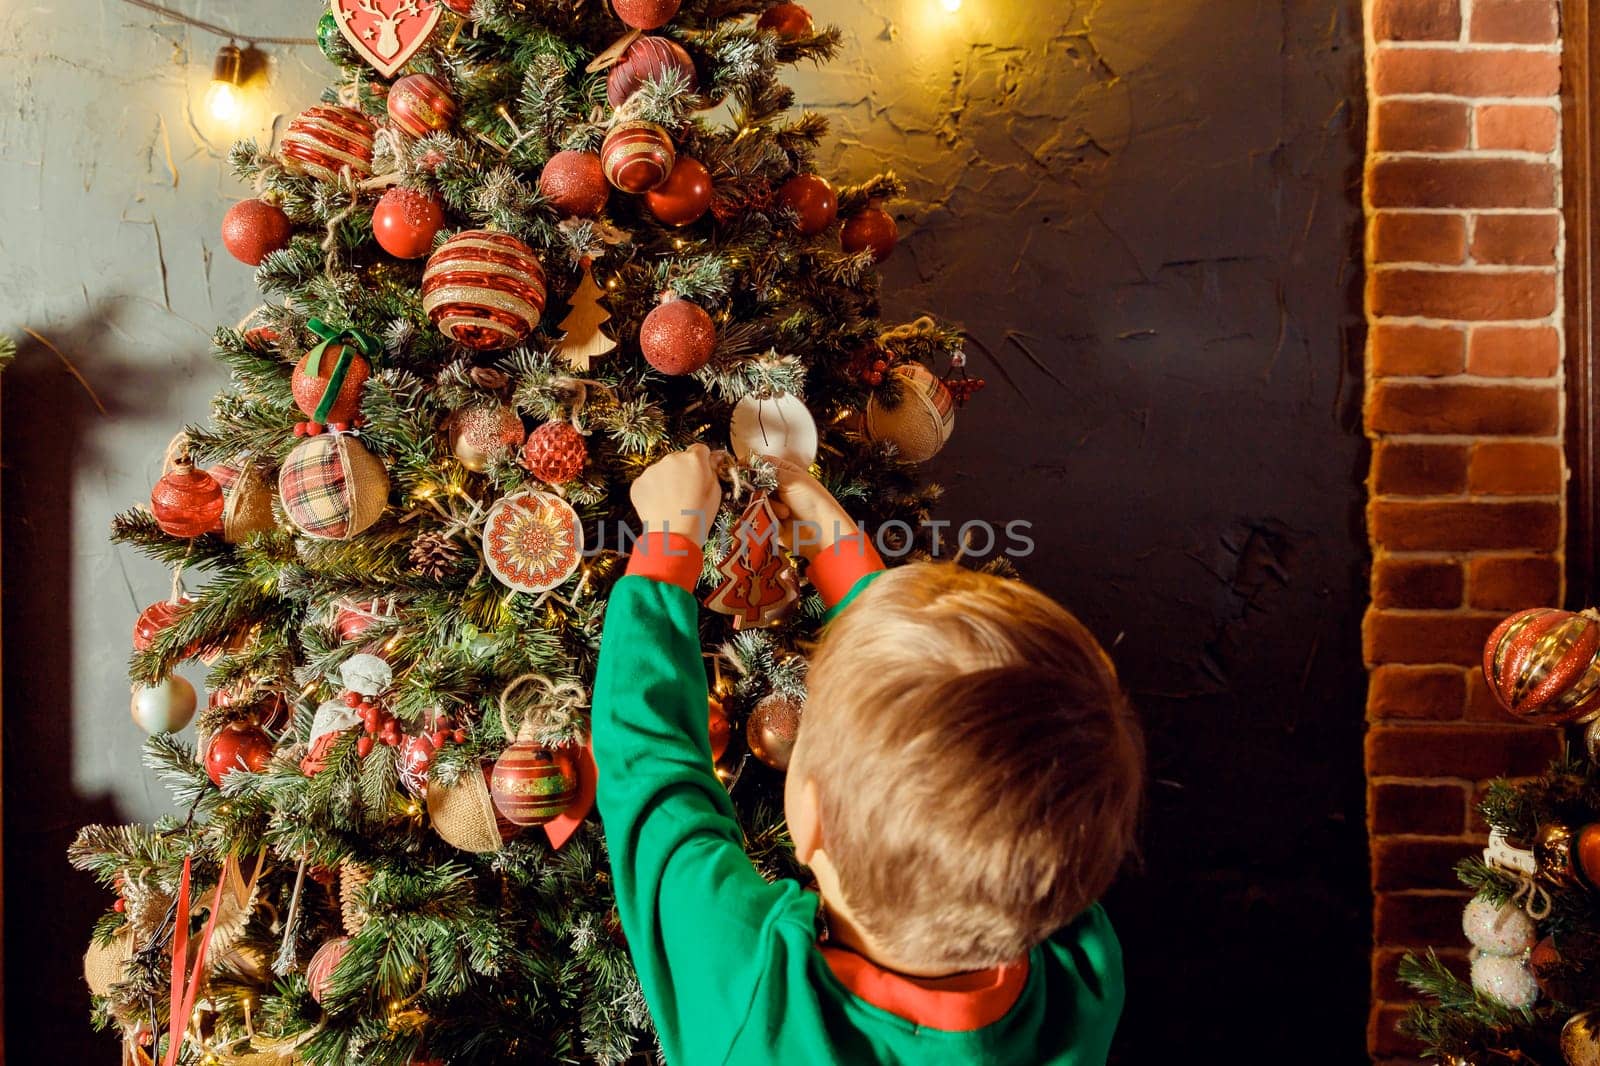 Child hanging a Christmas boot decoration illuminated on a Christmas tree from colorful ambient glowing lights.